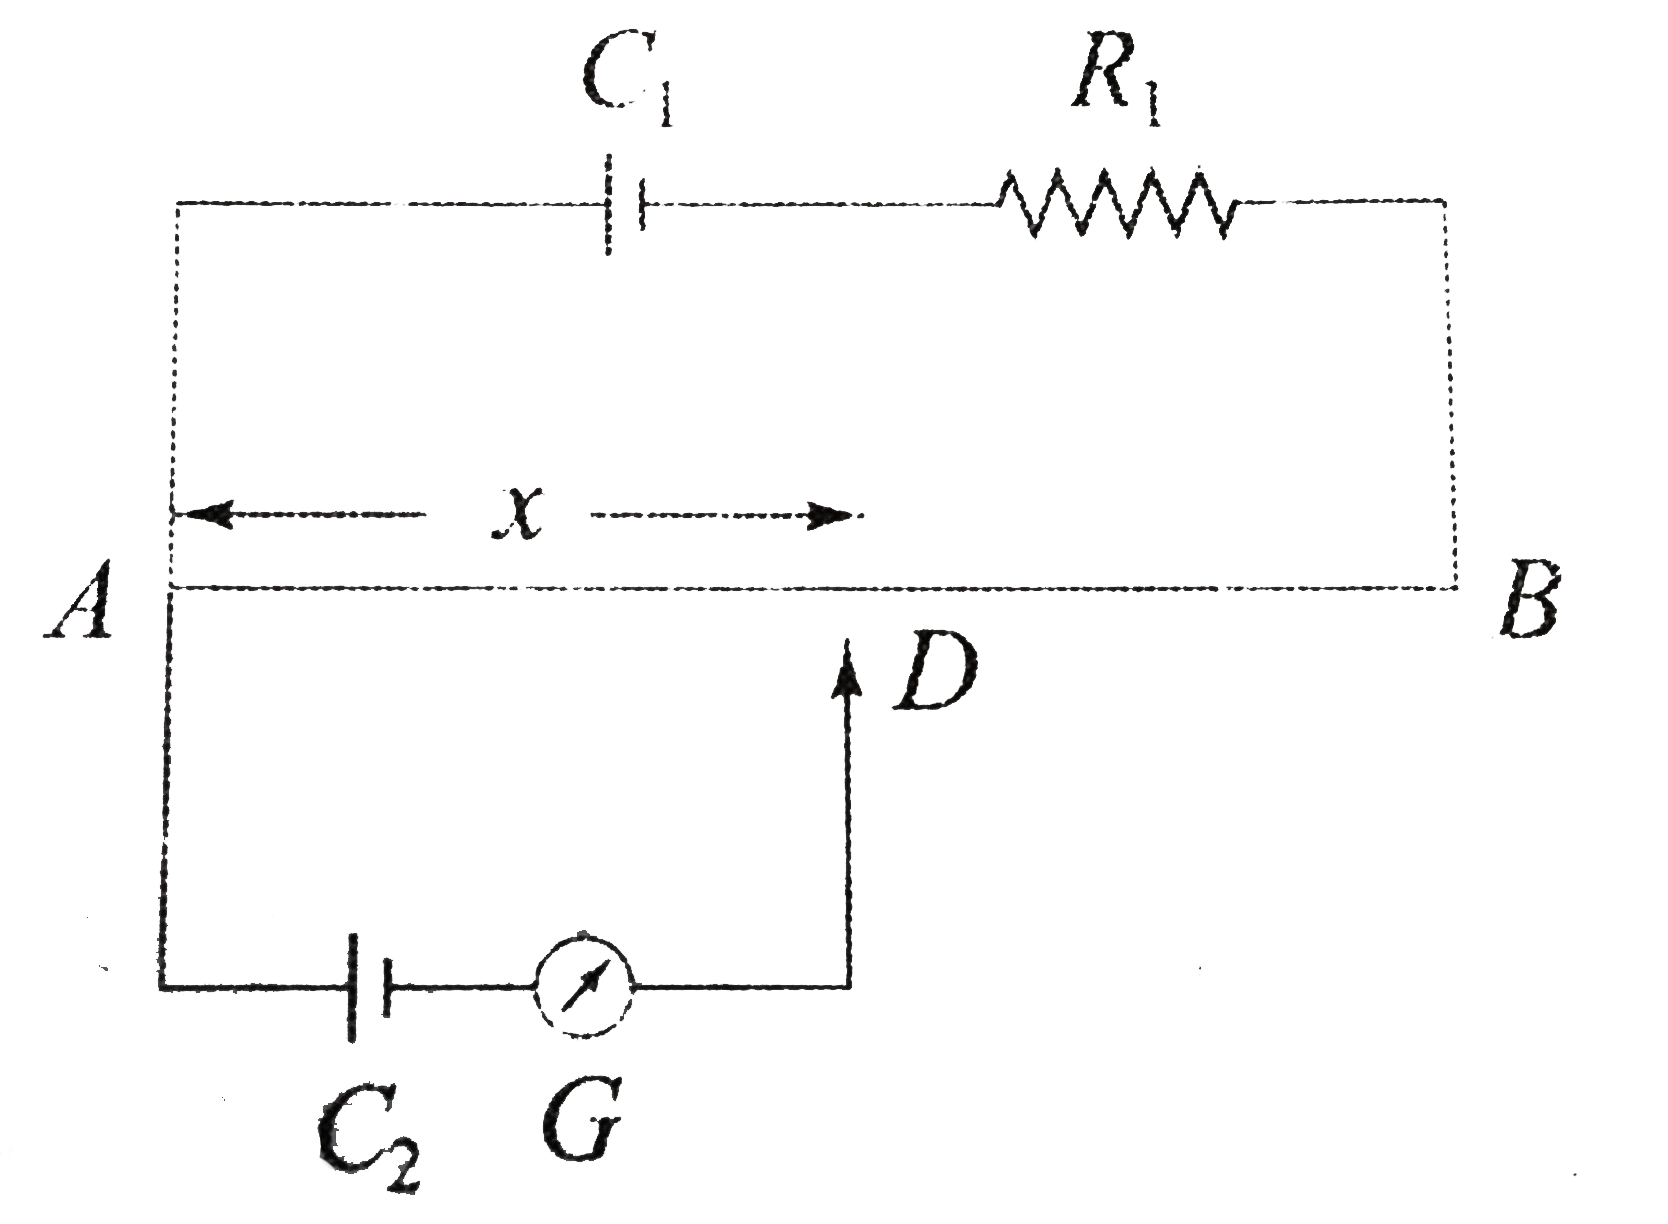 Statement I: In the potentiometer circuit shown in figure. E1 and E2 are the emf of cells C1 and C2, repsectively, with E1gtE2. Cell C1 has negligible internal resistance. For a given resistor R, the balance length is x. If the diameter of the potentiometer wire AB is increased, the balance length x will decrease.      Statement II: At the balance point, the potential difference between AD due to cell C1 is E2 , the emf of cell C2.